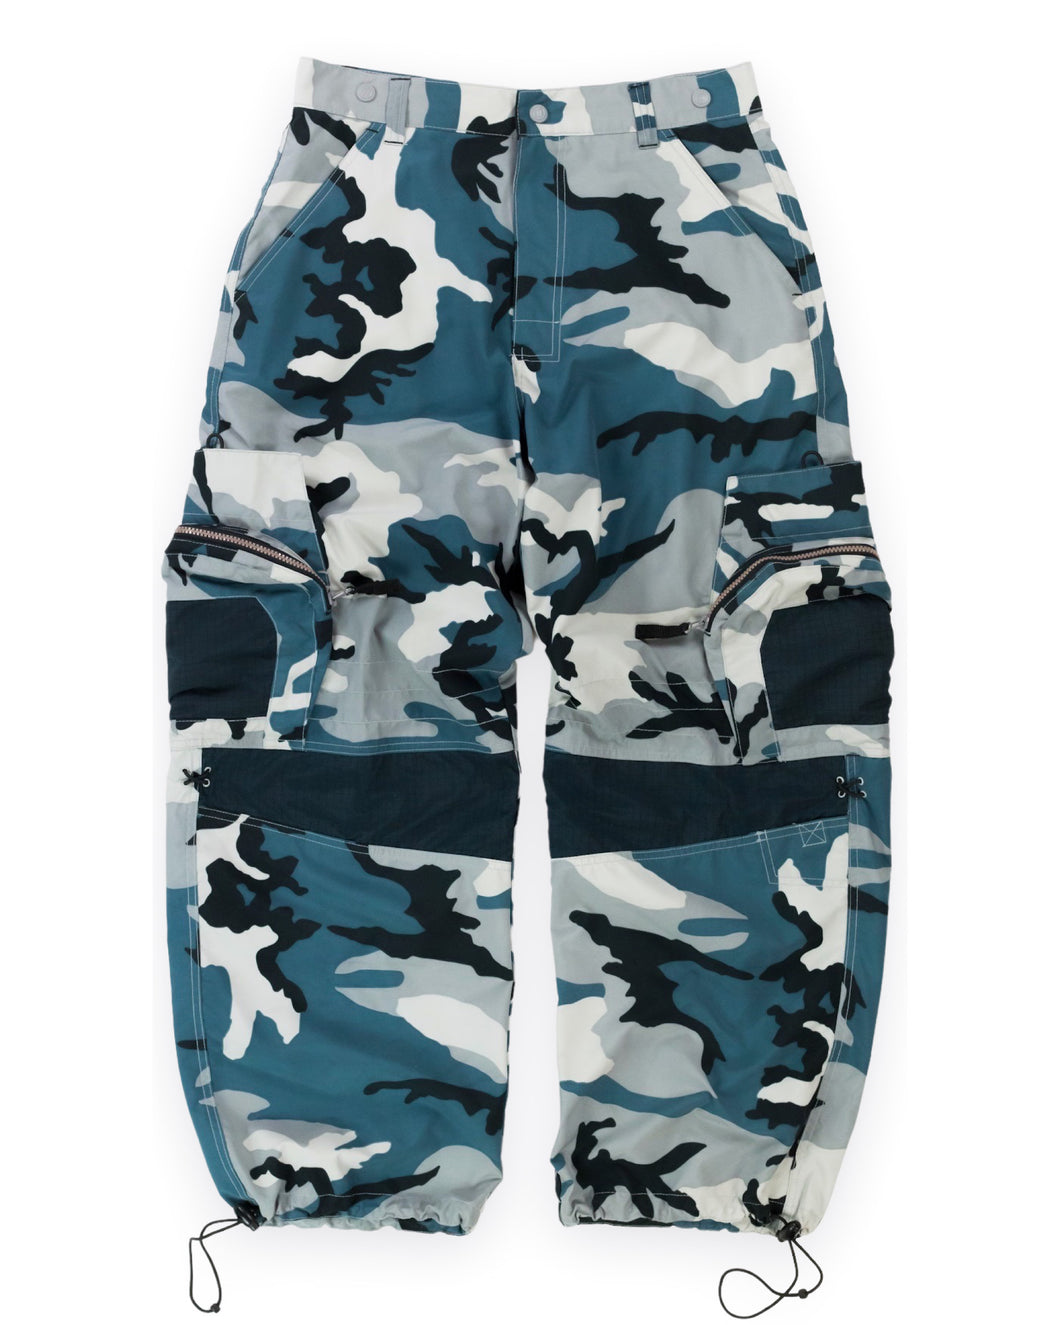 MACgear Baggy Camouflage Rave Cargo Pants (Early 2000’s)  (30-33”)